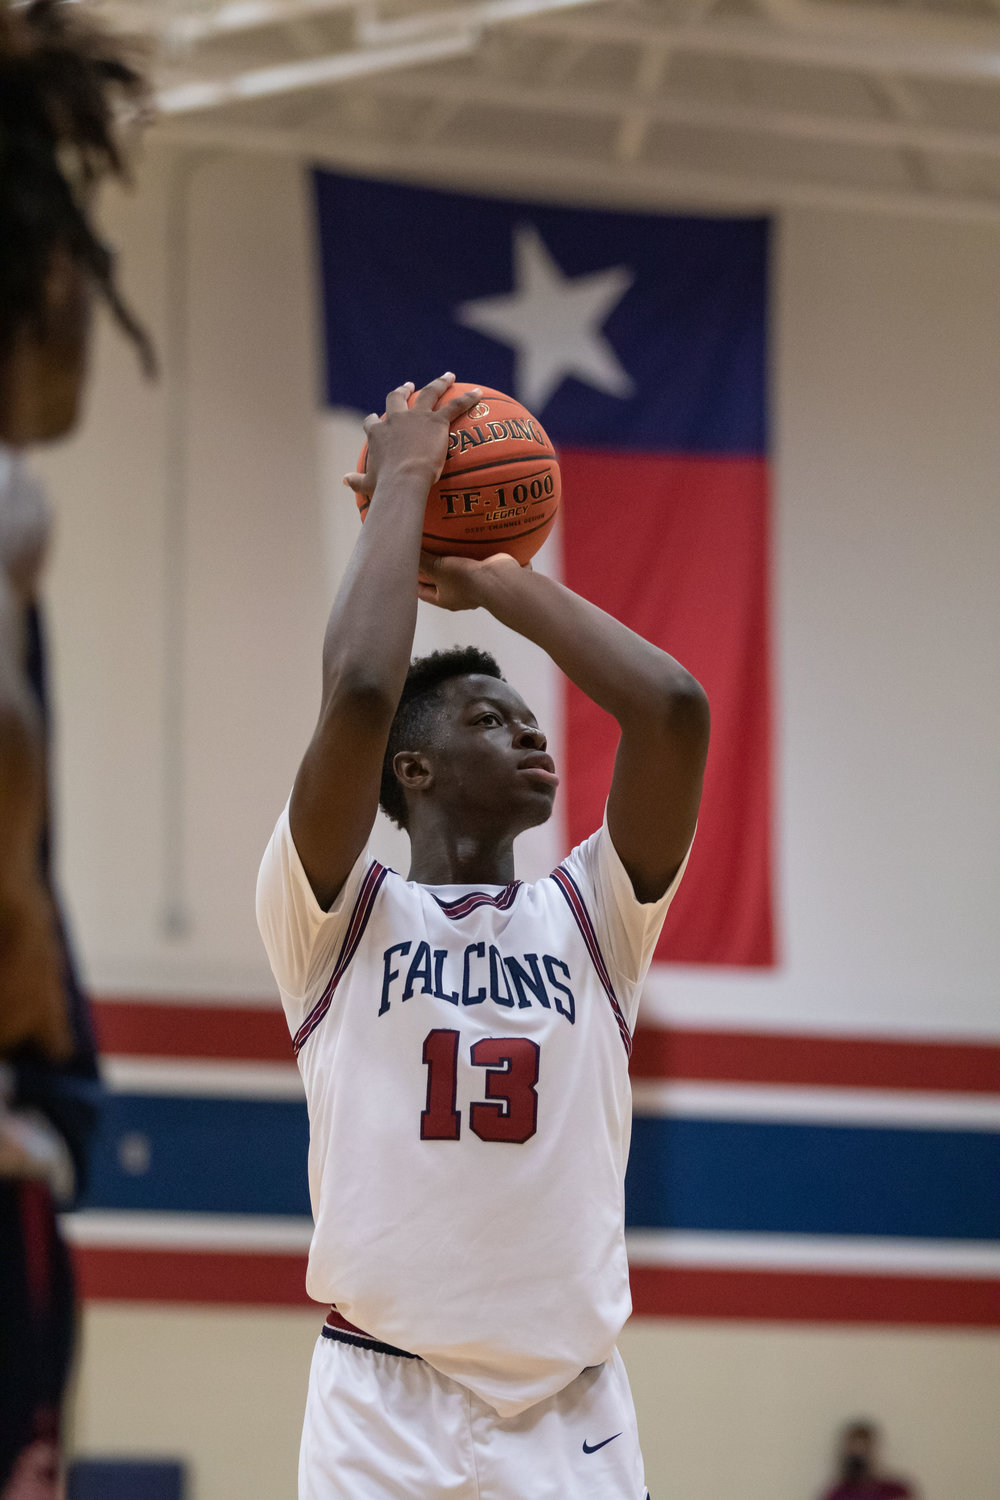 Tompkins junior forward Joel Oluokun had 15 points, eight rebounds and two blocks in the Falcons' win over Mayde Creek on Jan. 29 at home.